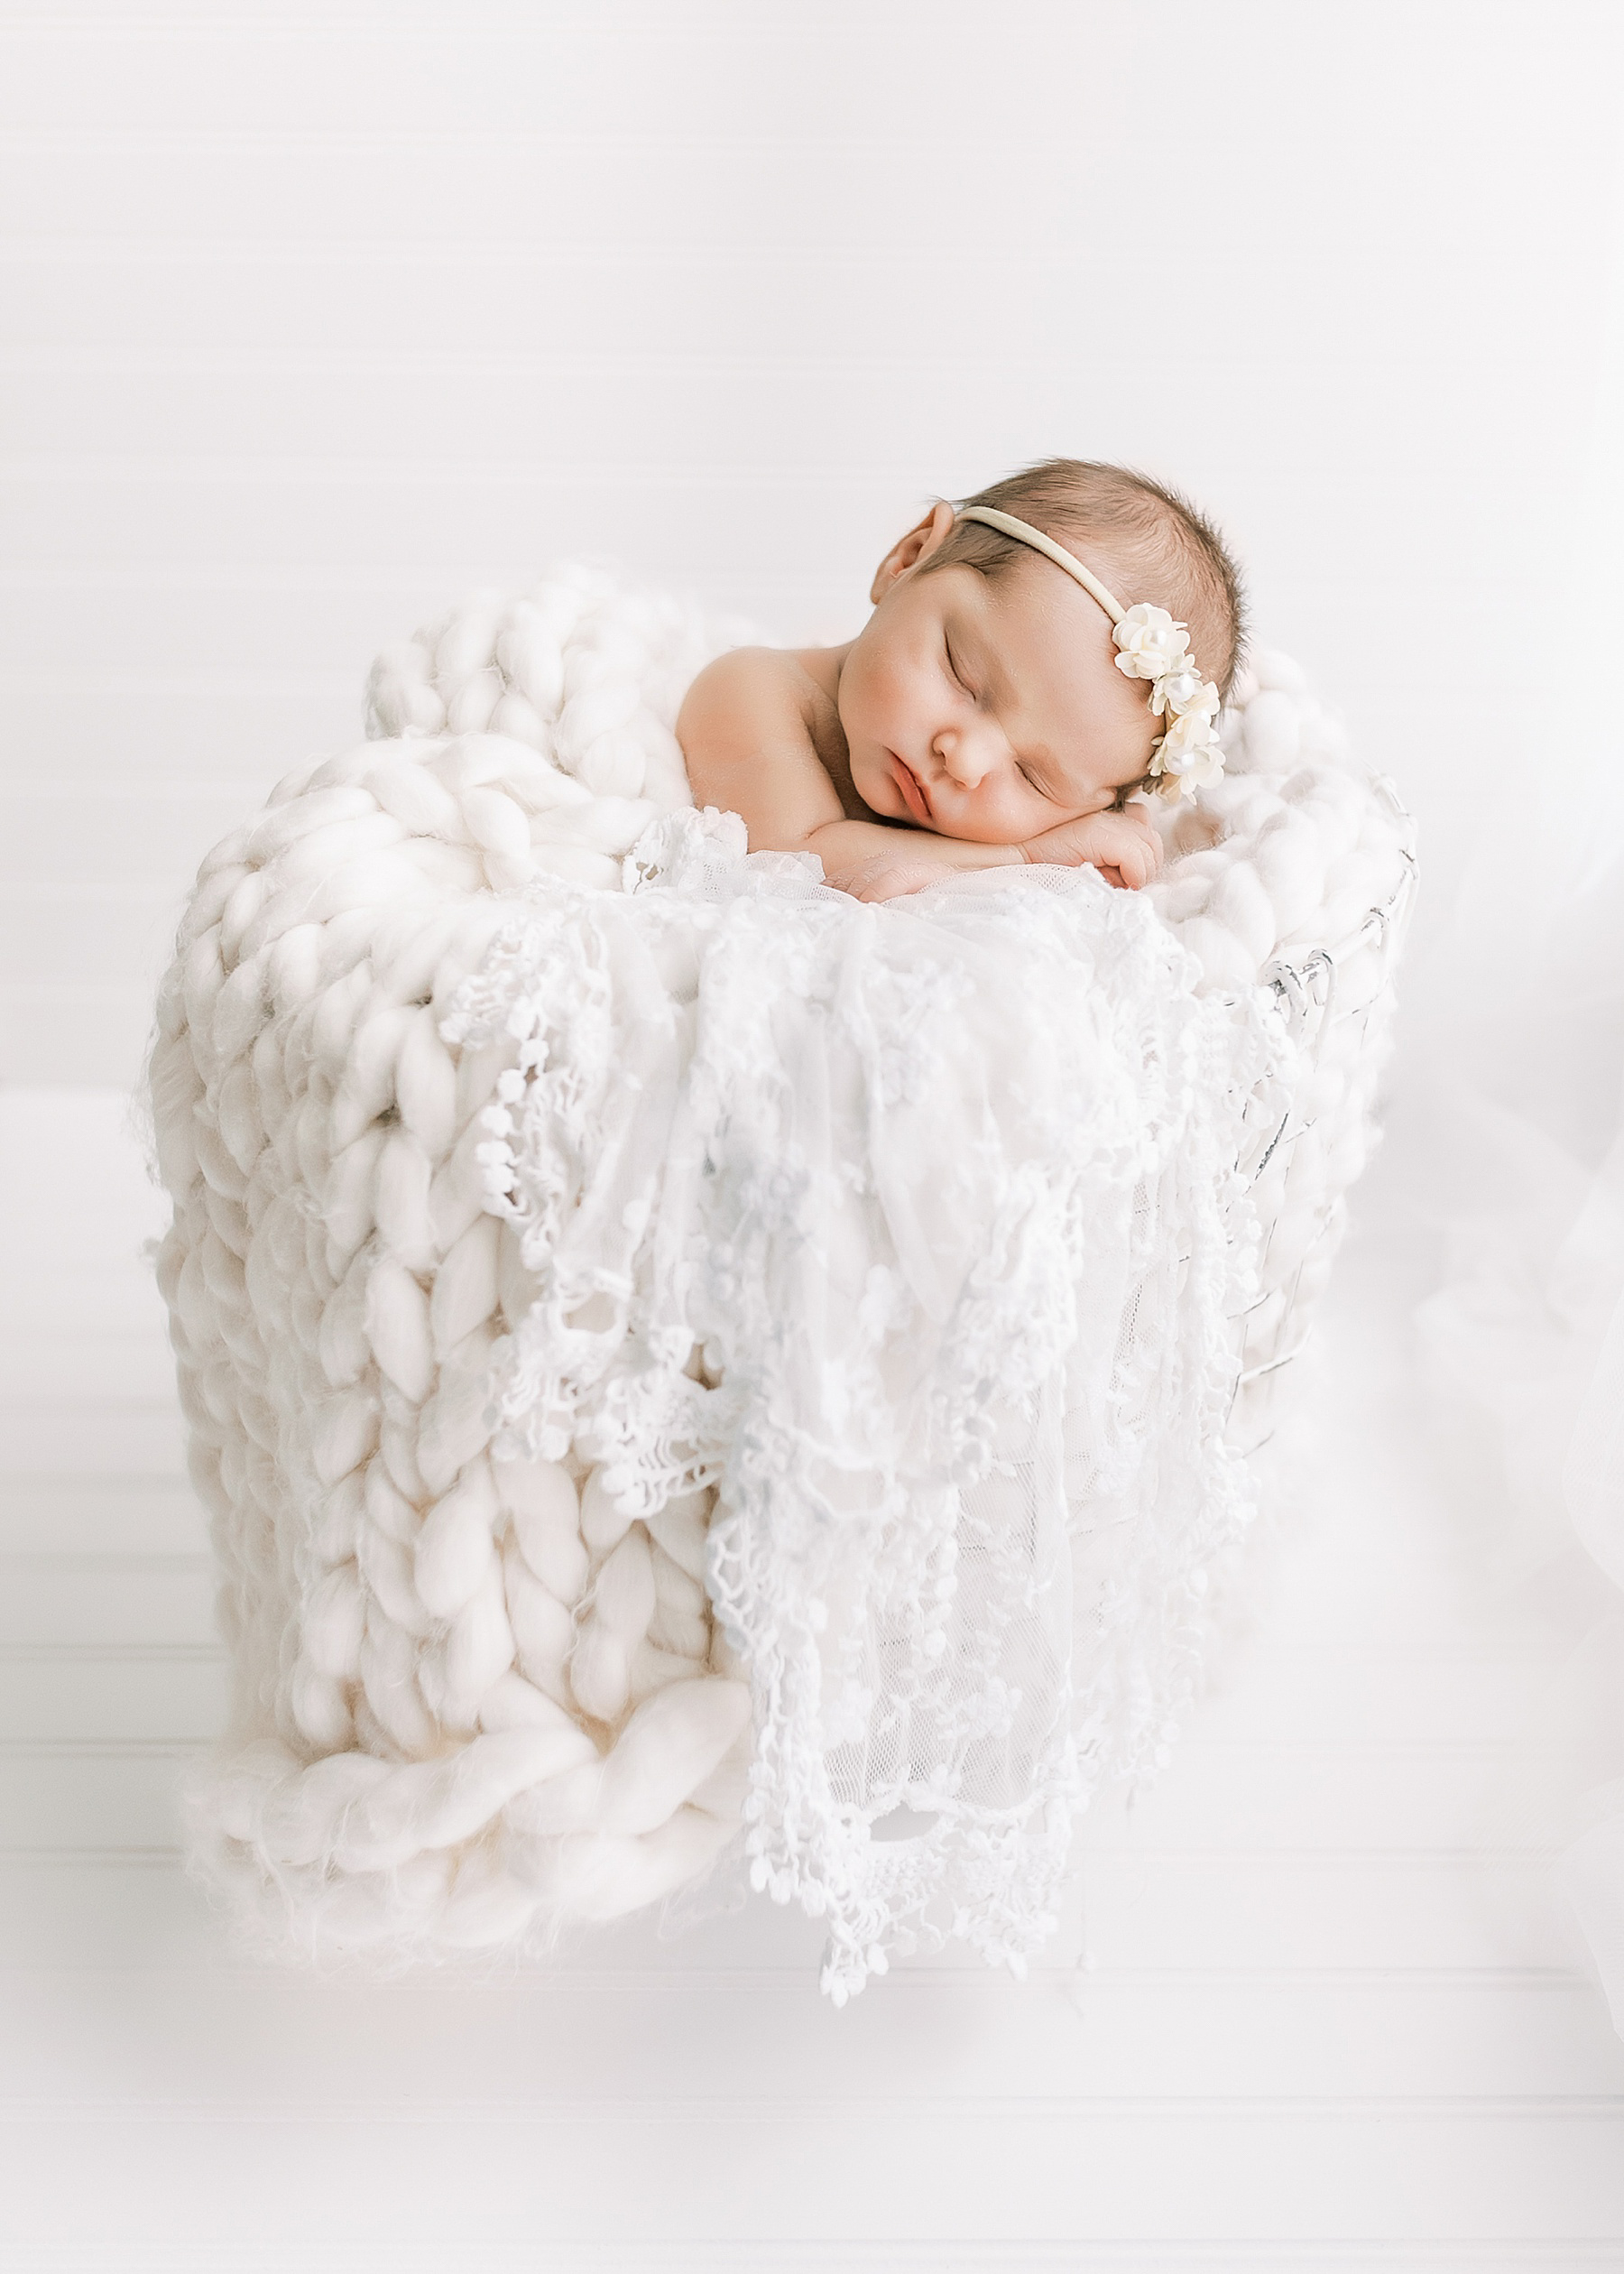 newborn baby girl wrapped in white blankets in white wire basket on white floor in front of a window